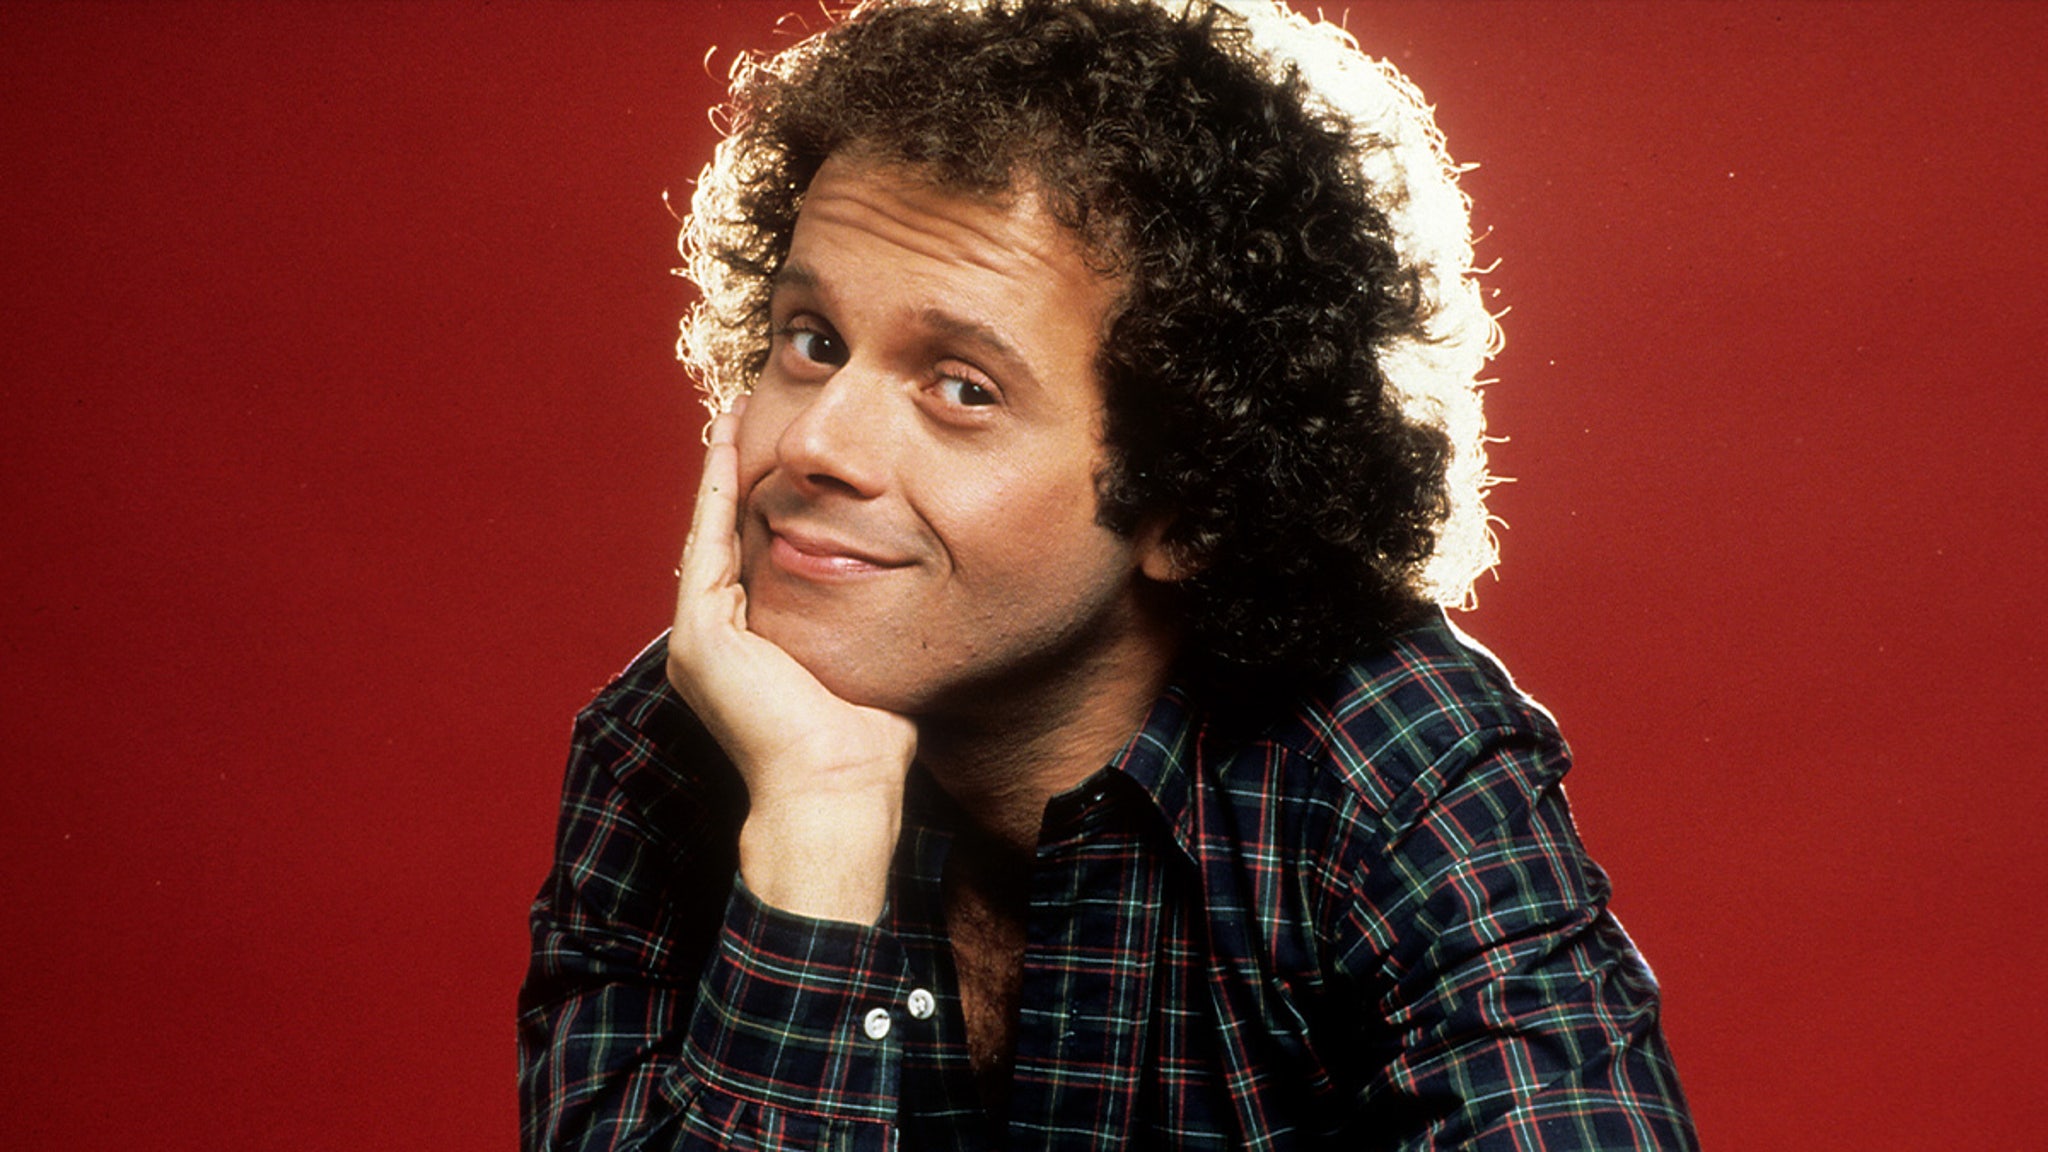 Richard Simmons died at the age of 76